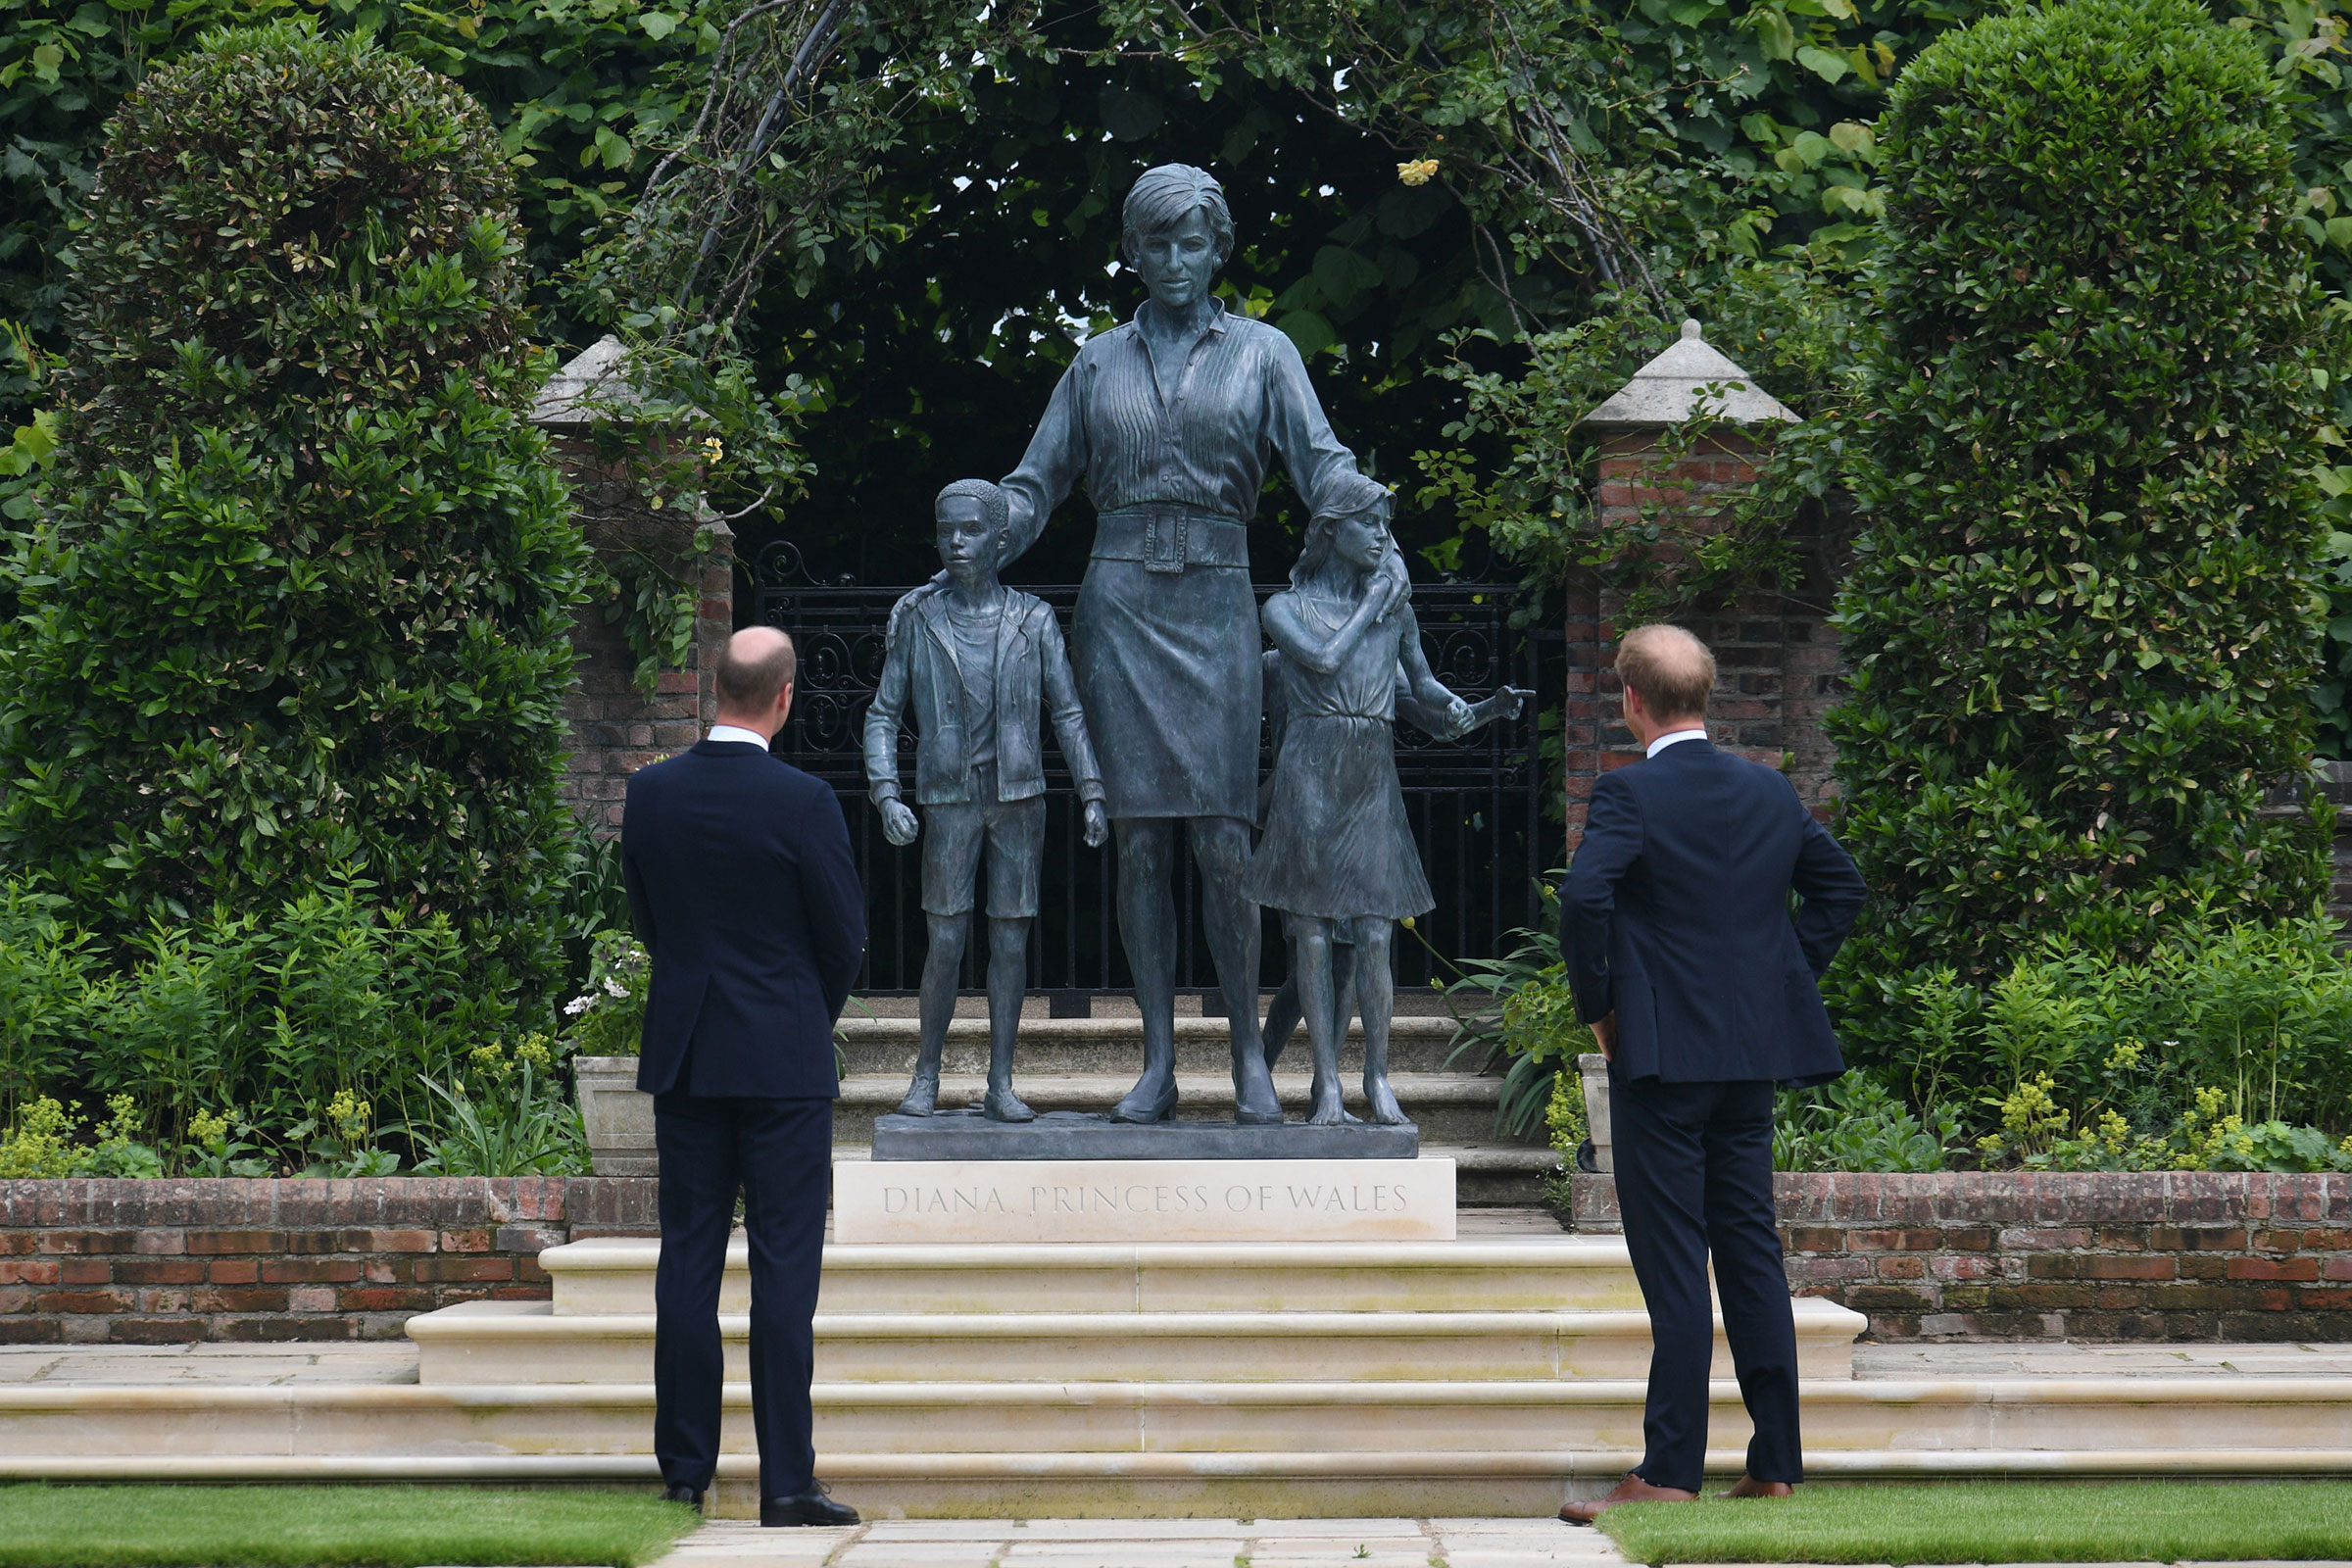 Prince William and Prince Harry look at a statue they commissioned of their mother Diana, in the Sunken Garden at Kensington Palace, on what would have been her 60th birthday on July 1, 2021. (Dominic Lipinski—WPA Pool/Getty Images)